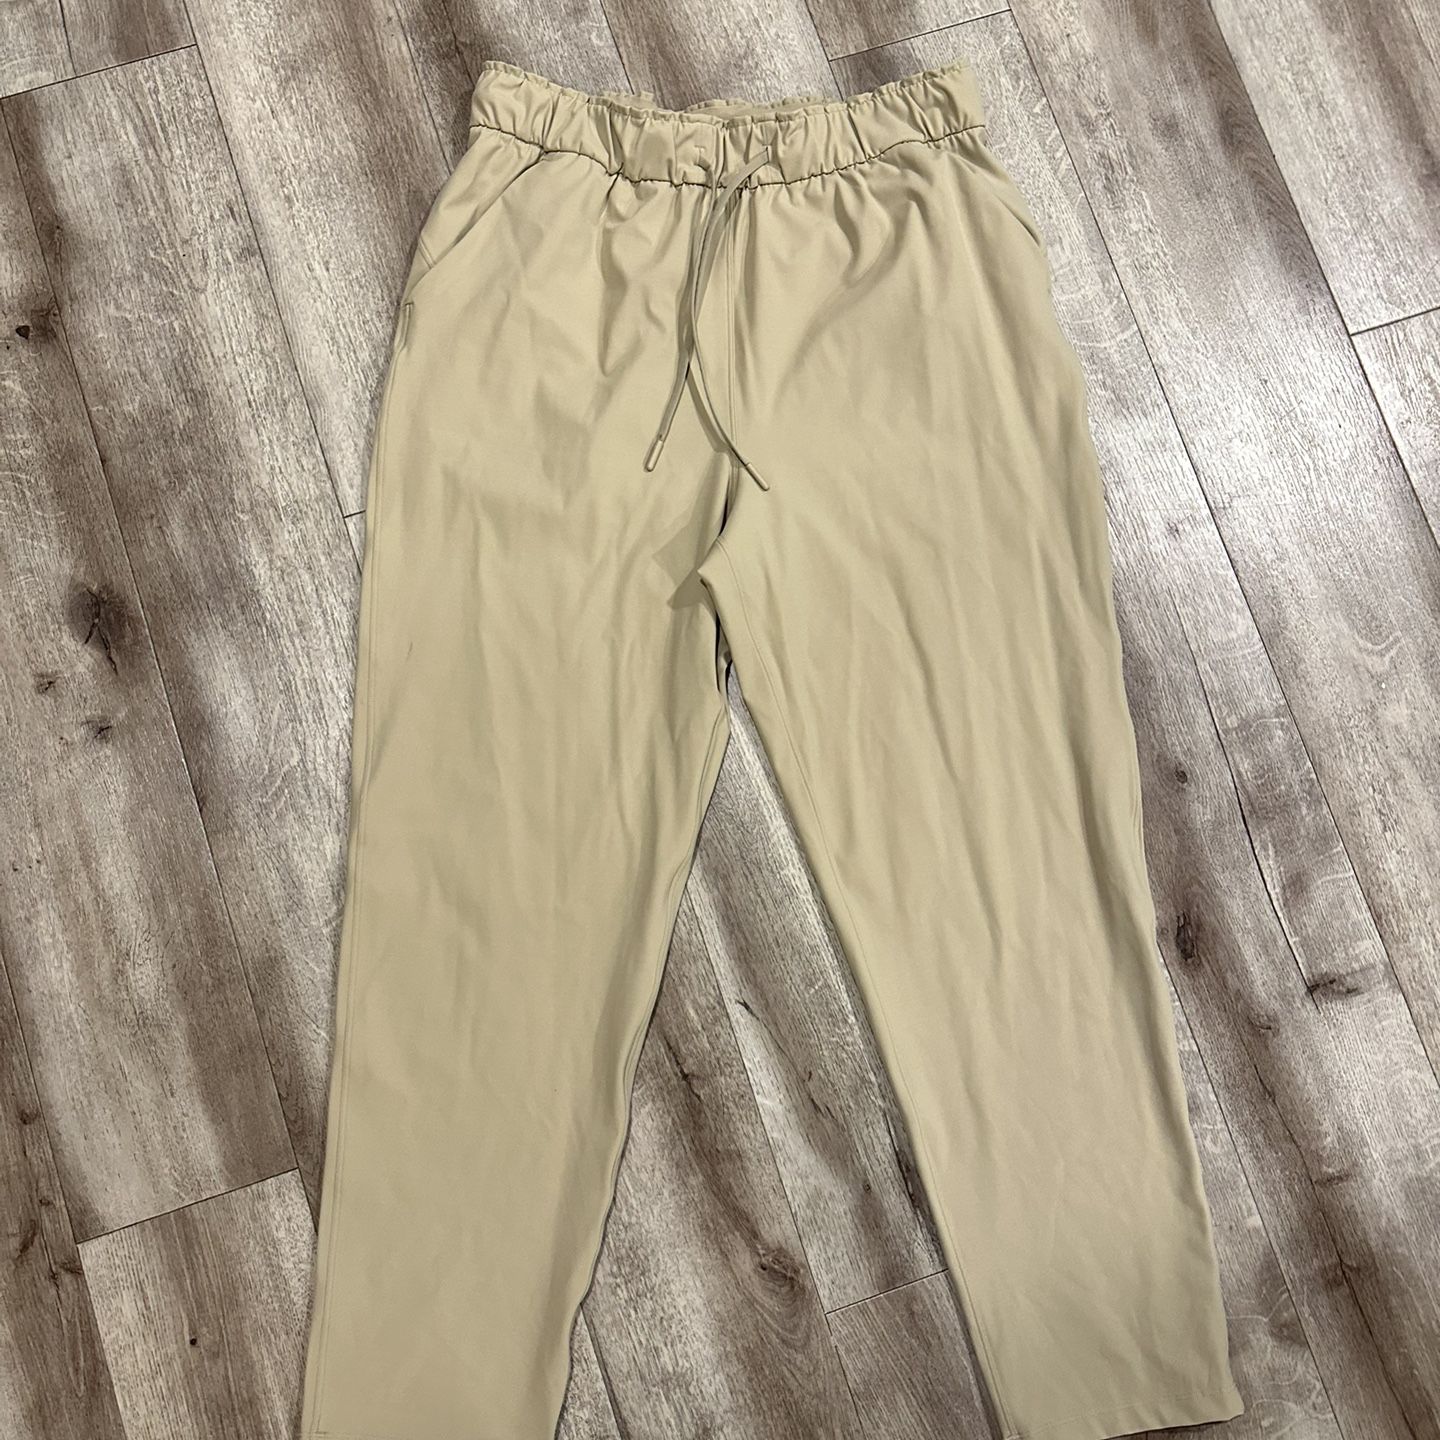 Lululemon Keep Moving High Rise Full Length Pants in Trench Size